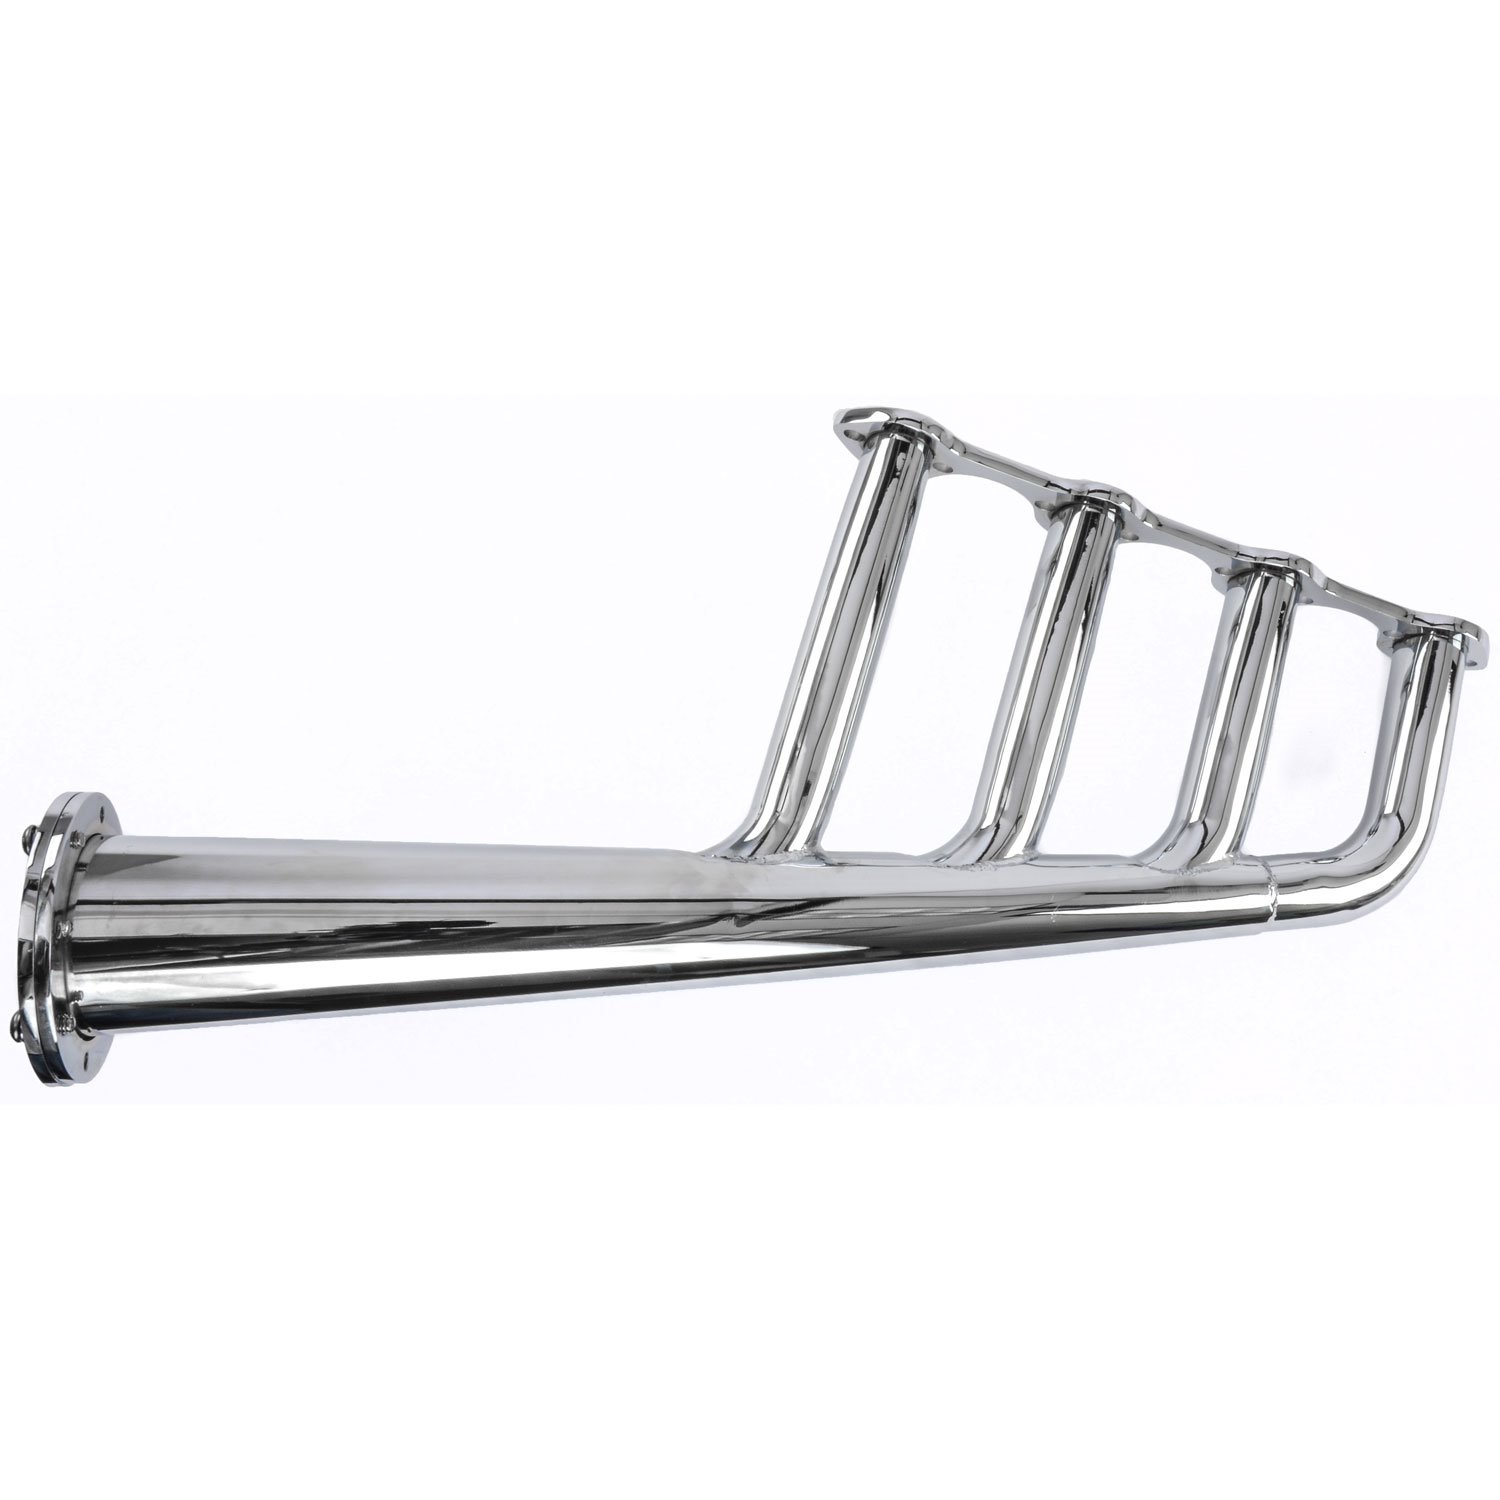 Ford small block headers